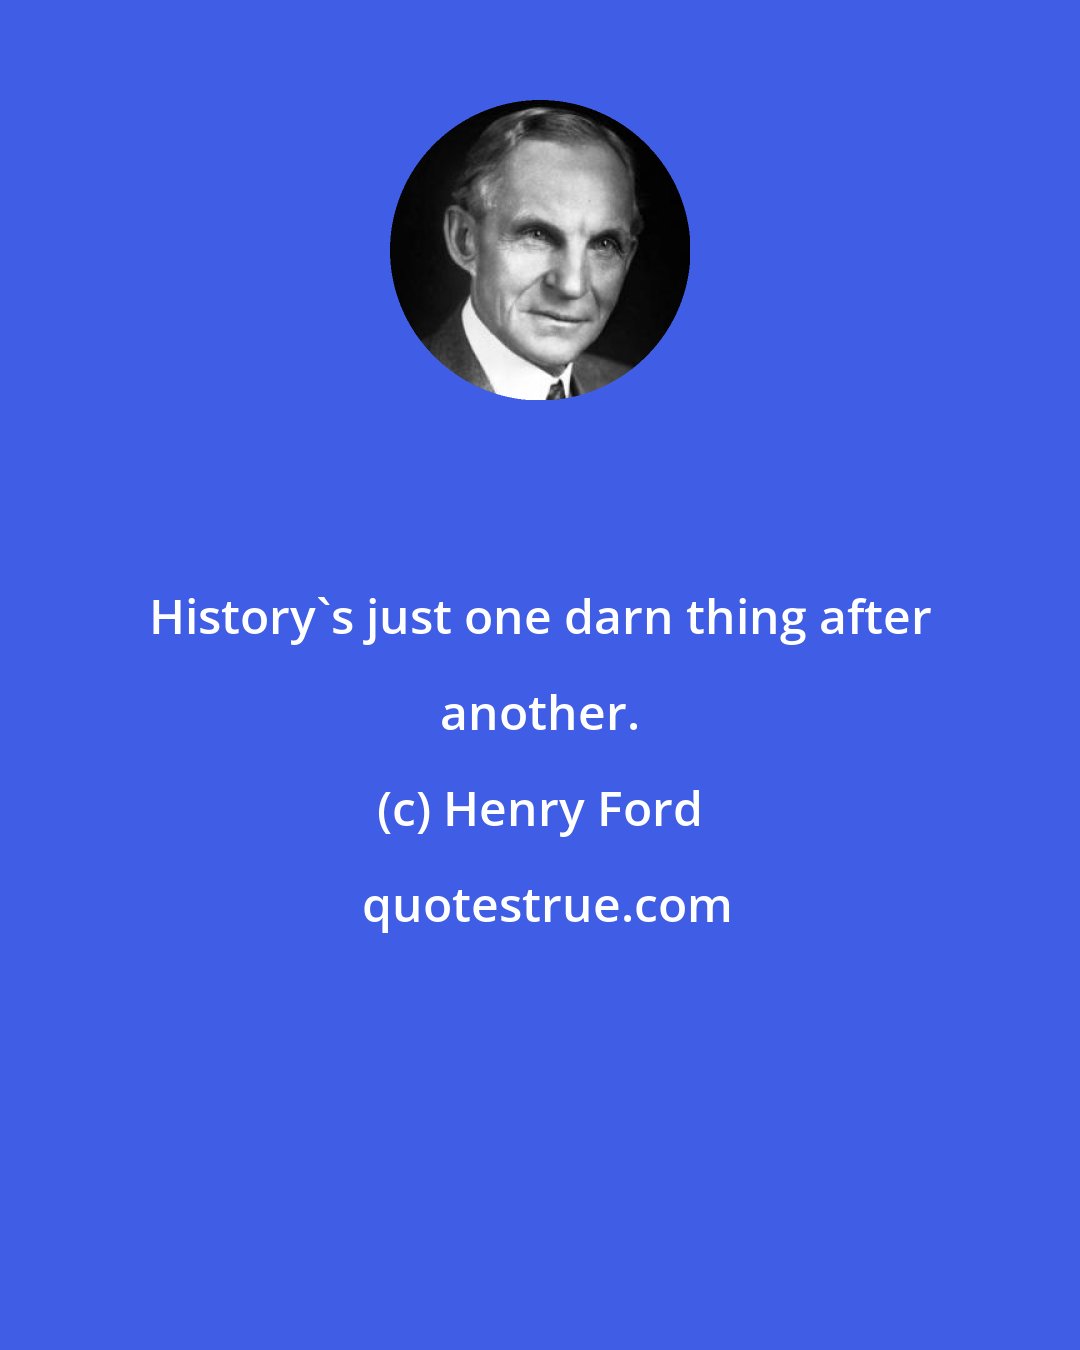 Henry Ford: History's just one darn thing after another.